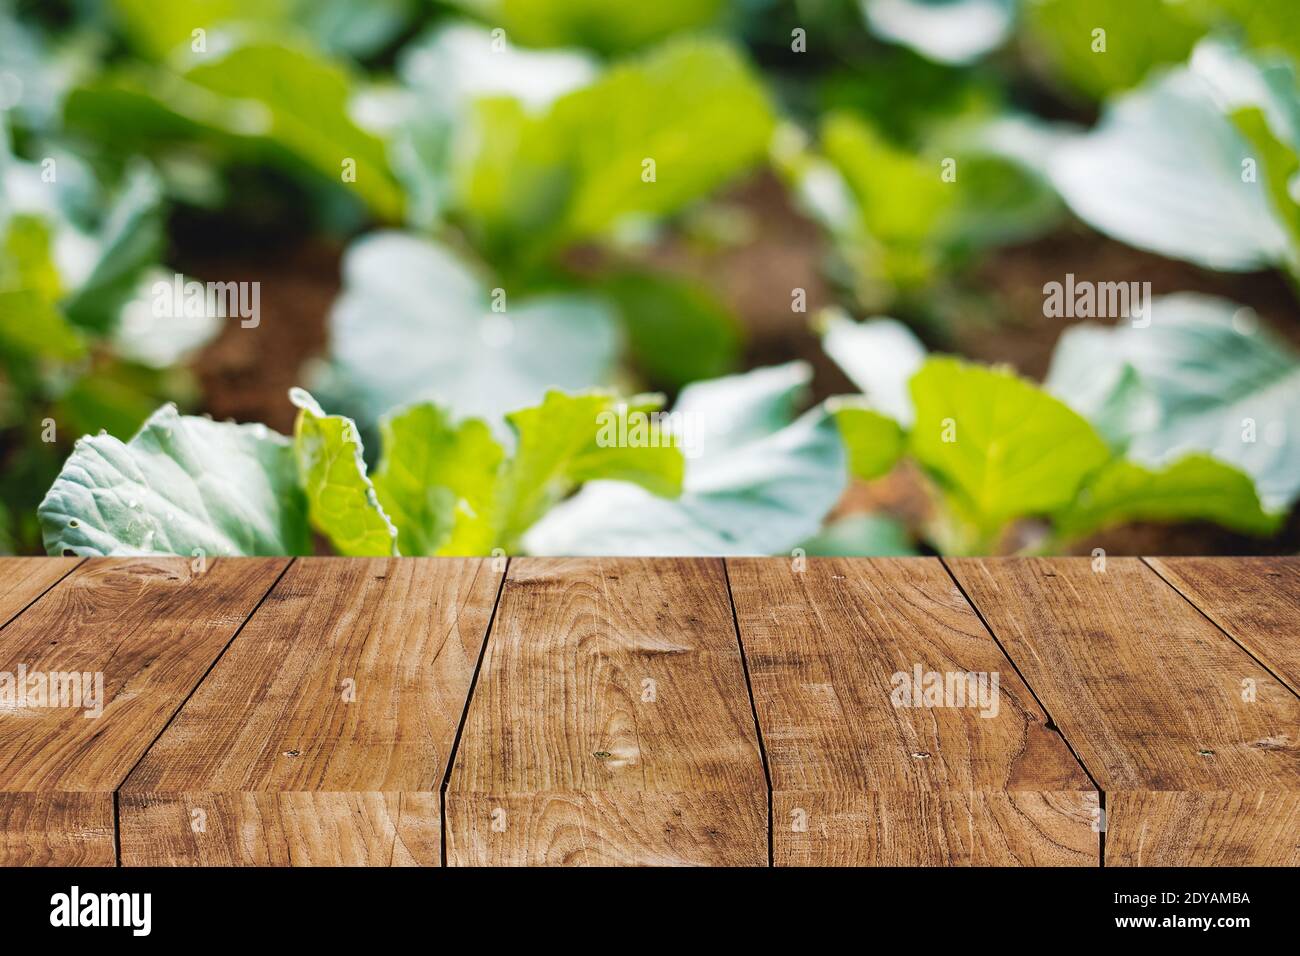 Blur home vegetable garden plant at backyard with wooden tabletop foreground space for natural advertising background Stock Photo